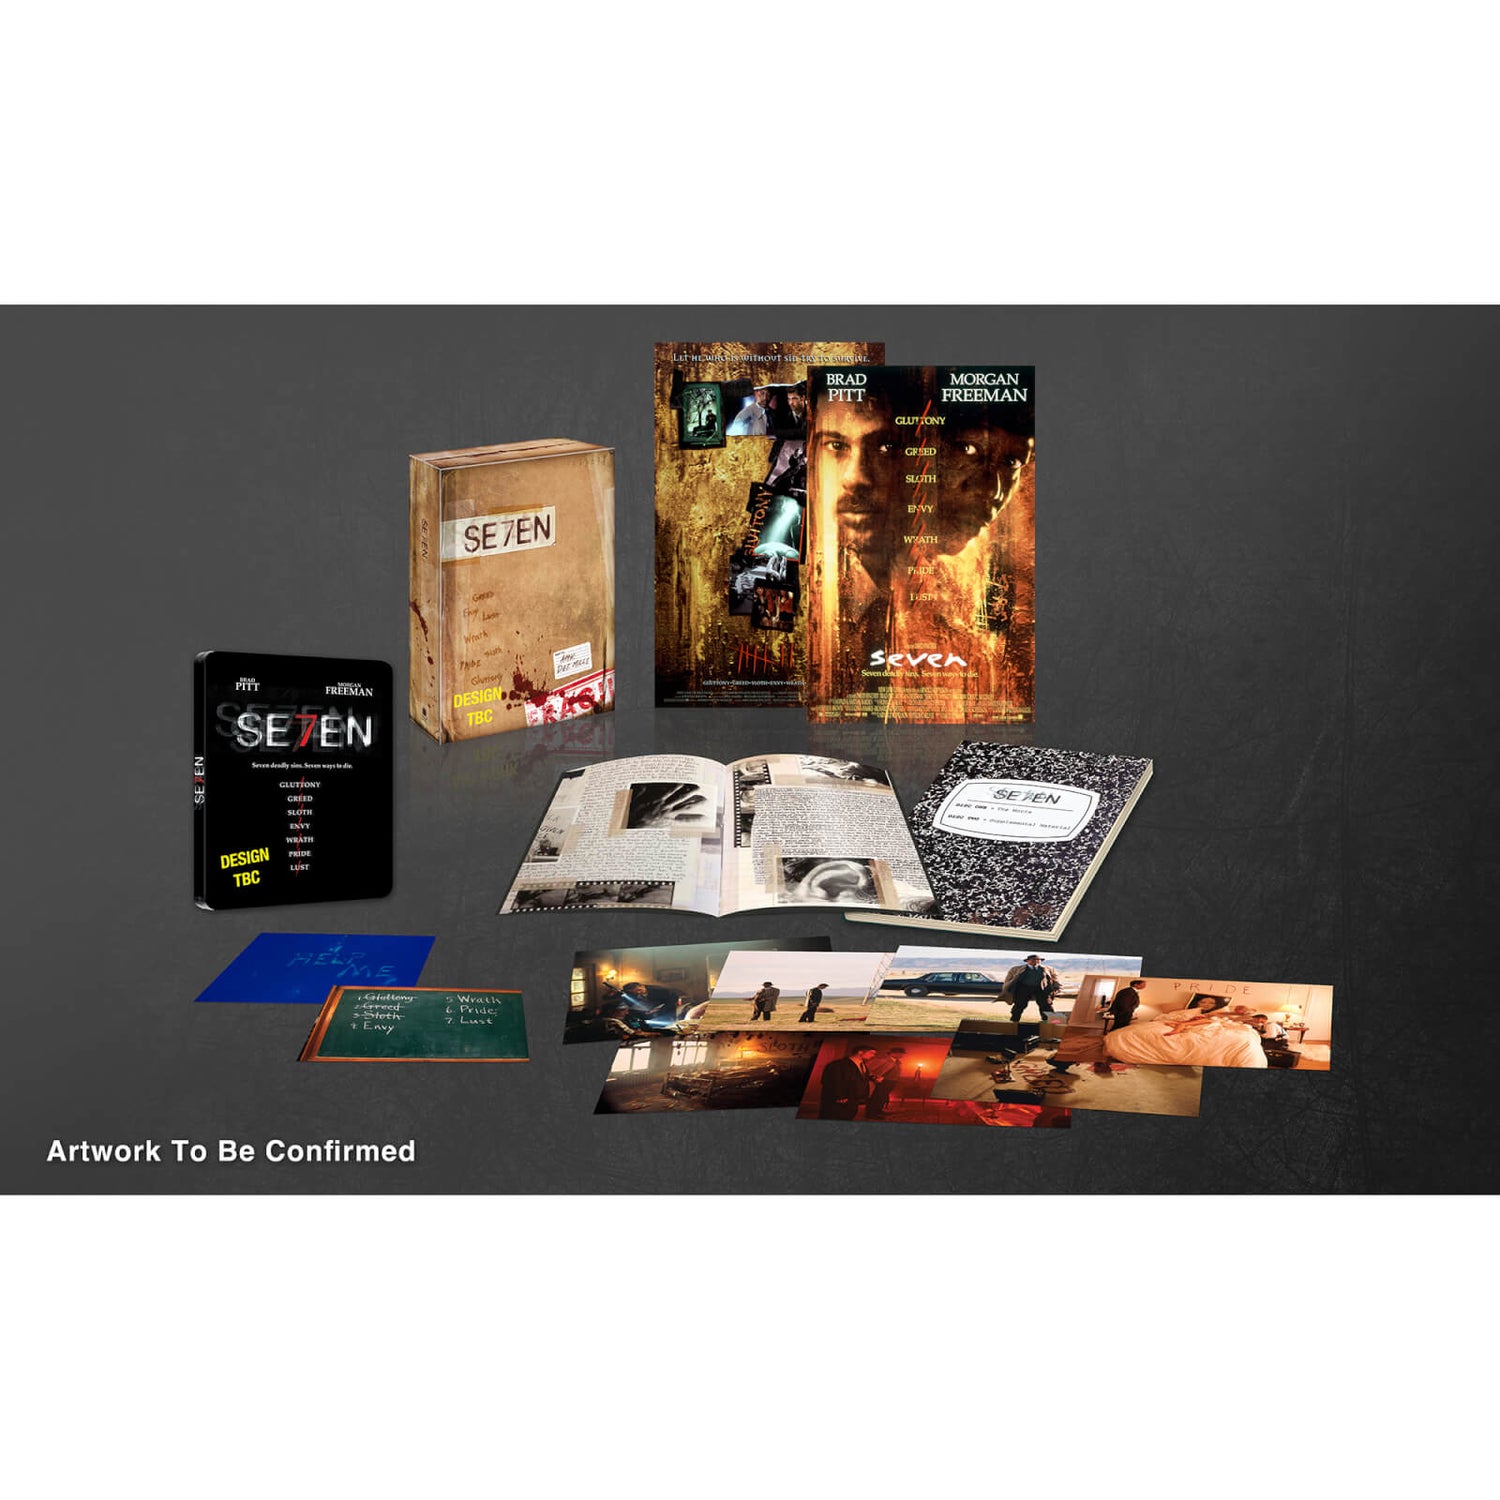 HBO's The Last Of Us 4K Physical Release Is Up For Pre-Order Now And  There's A Gorgeous SteelBook